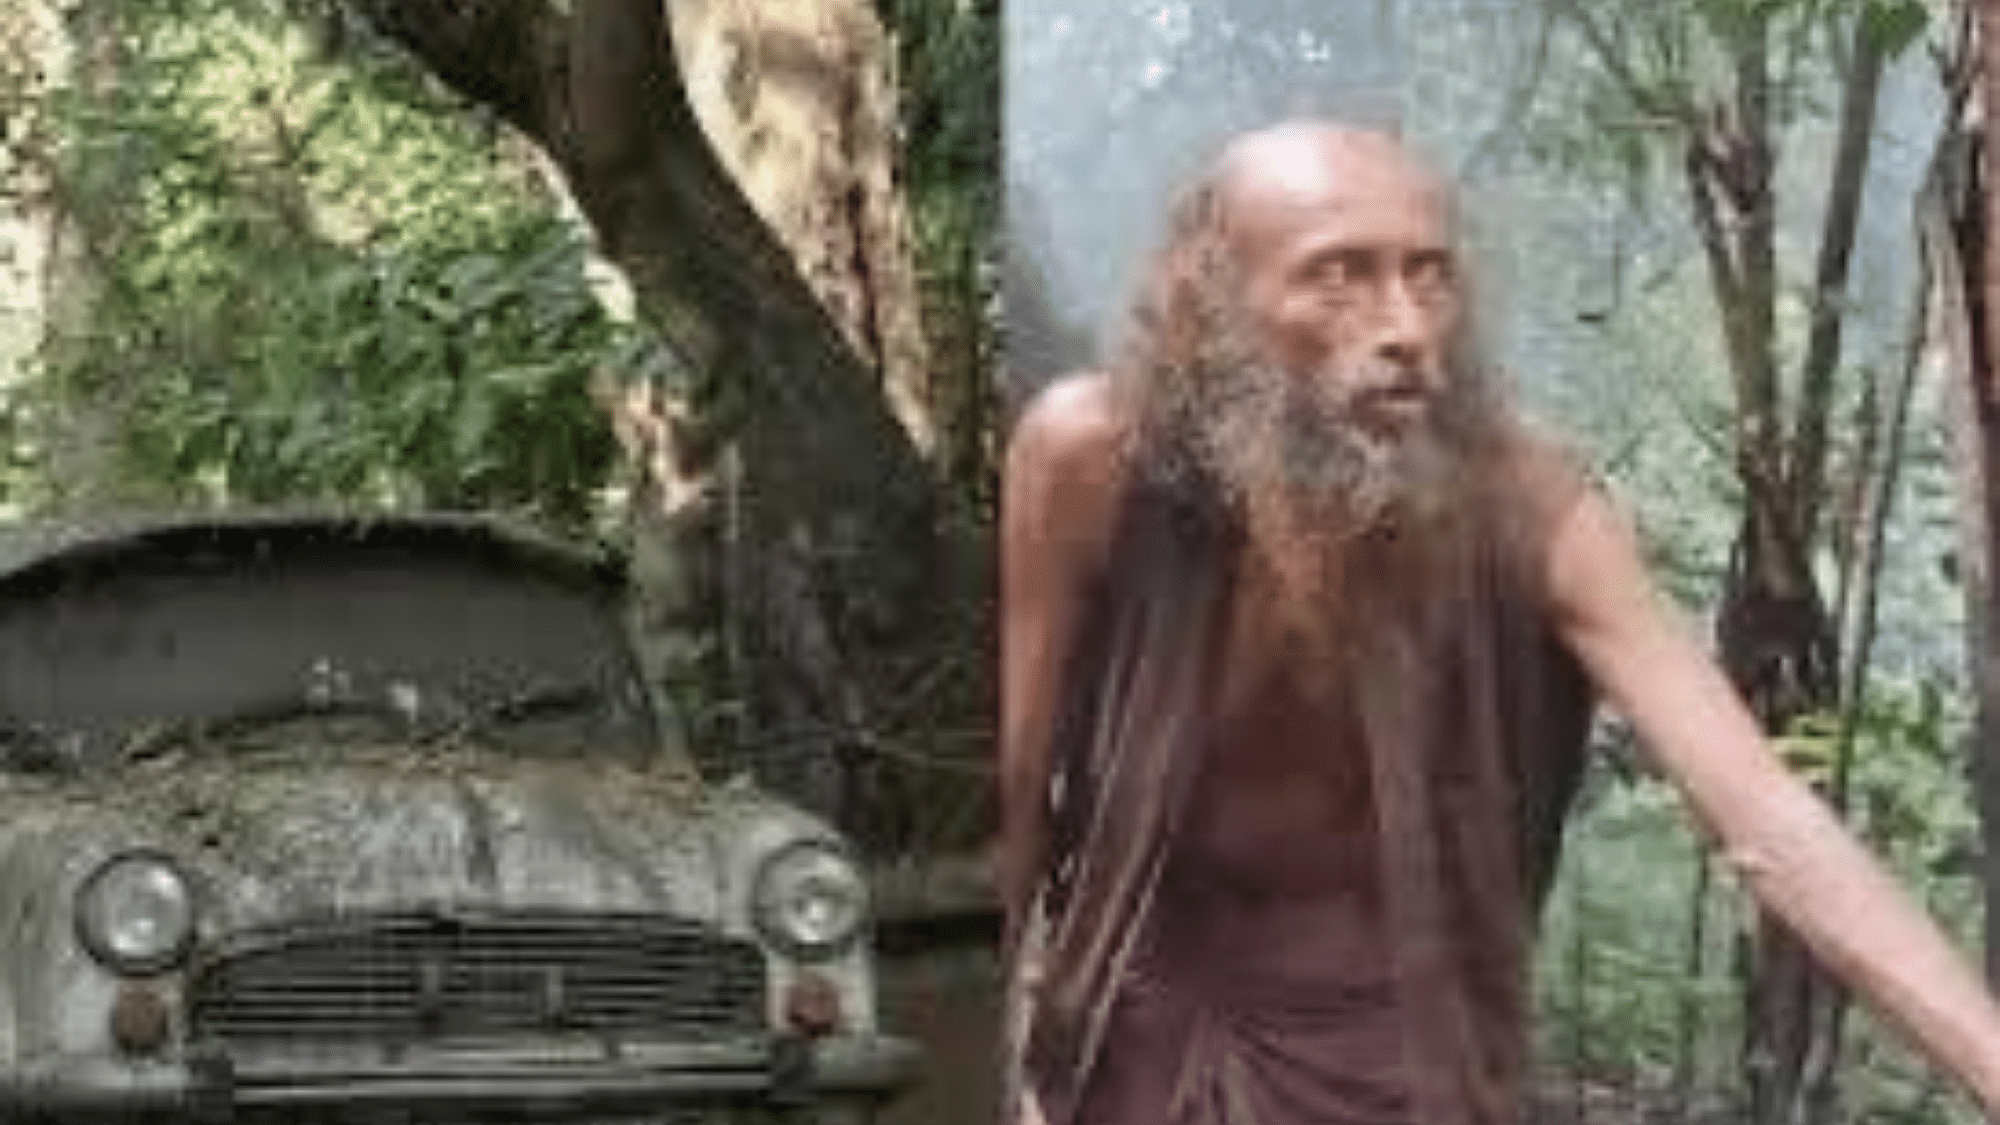 <div class="paragraphs"><p>56-year-old Chandrashekhar living in his ambassador parked in the forest for 17 years.</p></div>